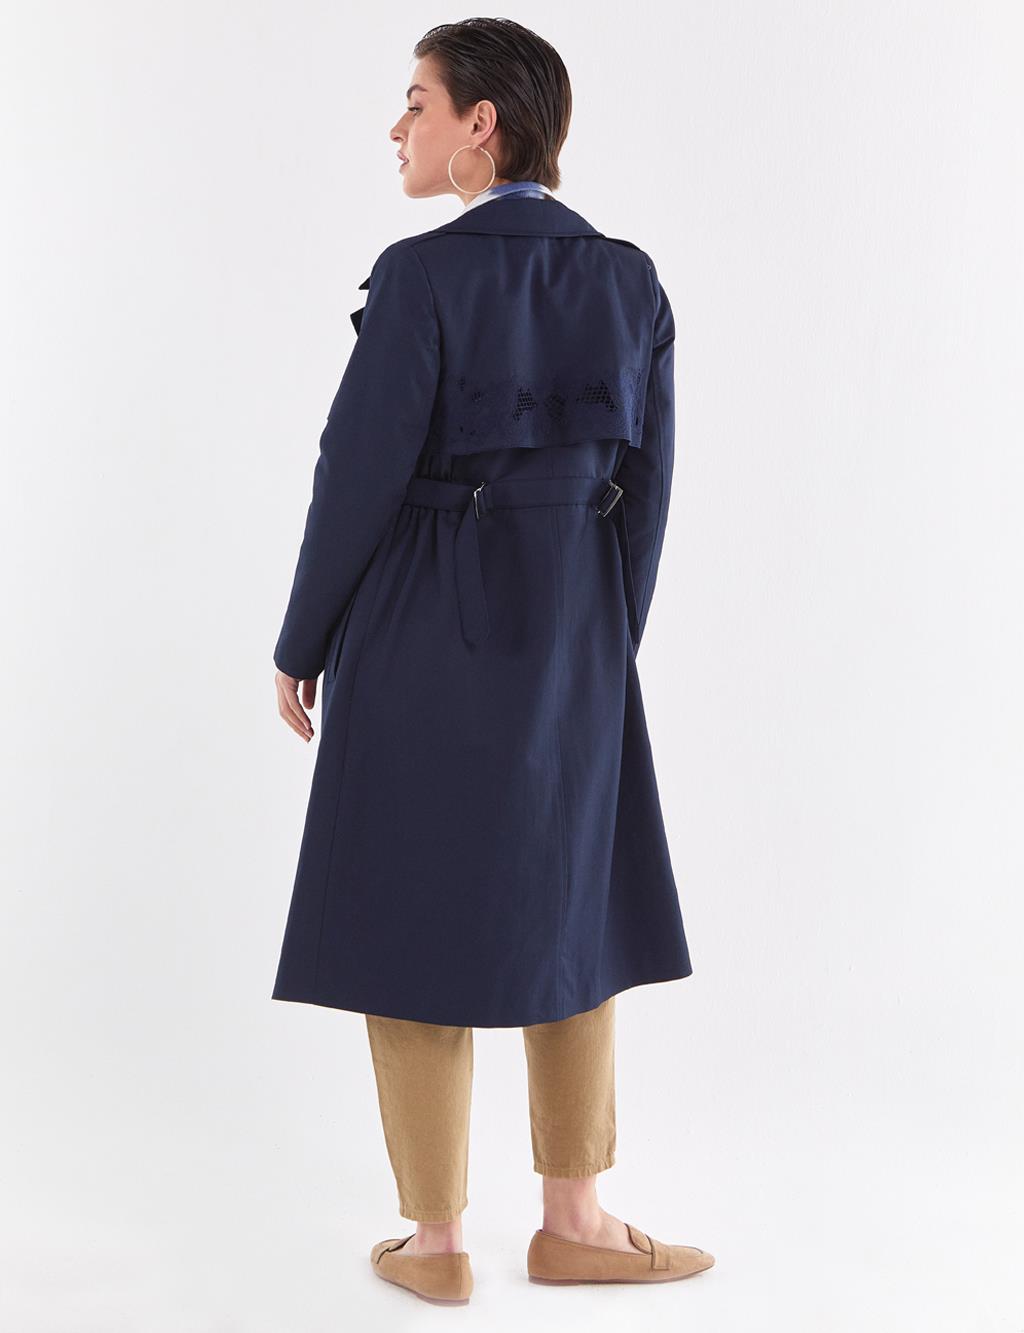 Embroidered Trench Coat Navy